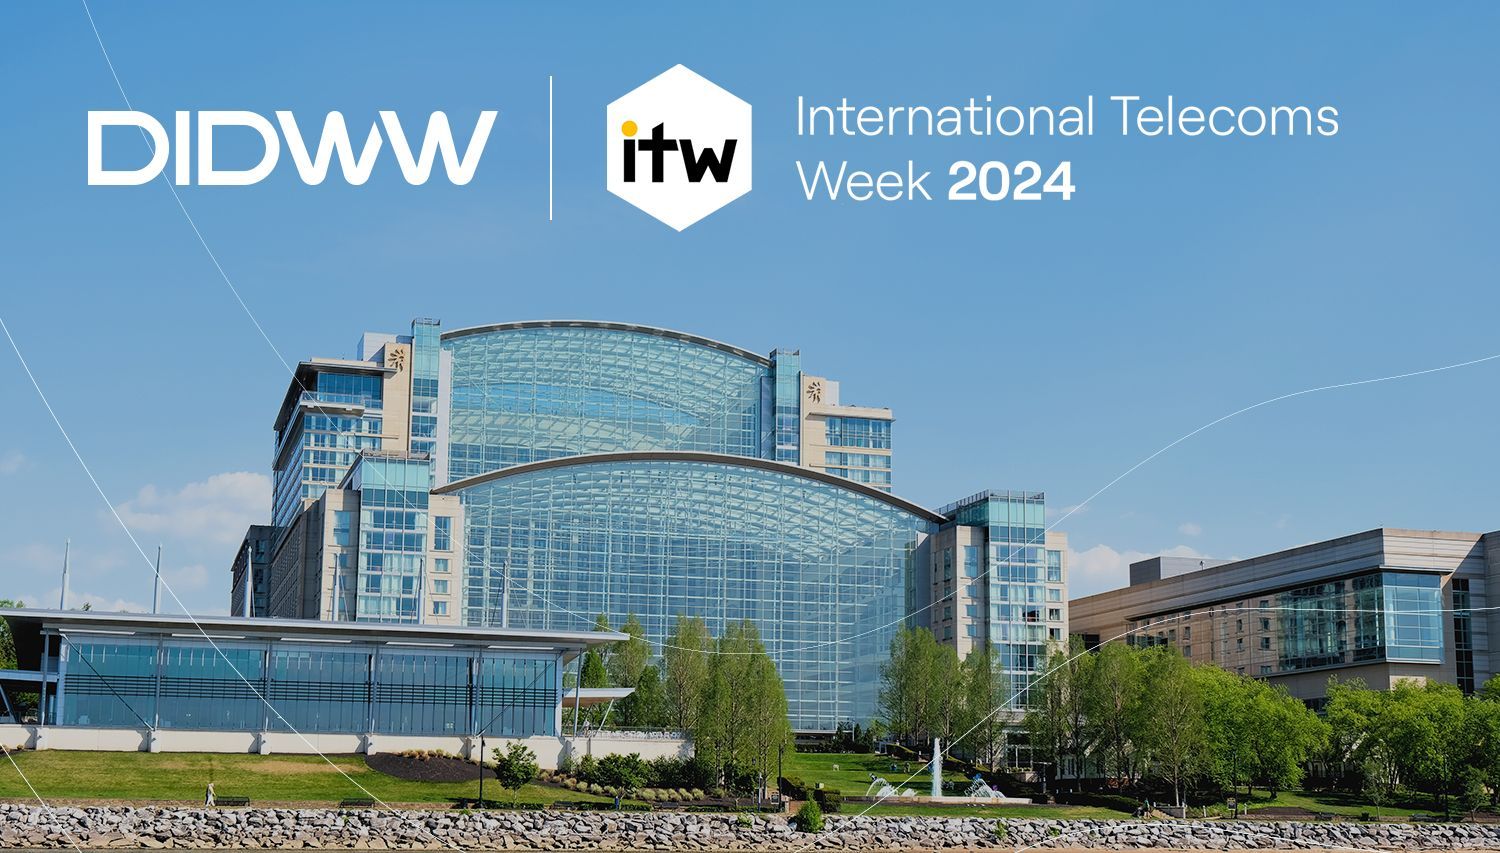 DIDWW to showcase advanced voice and SMS solutions at ITW 2024